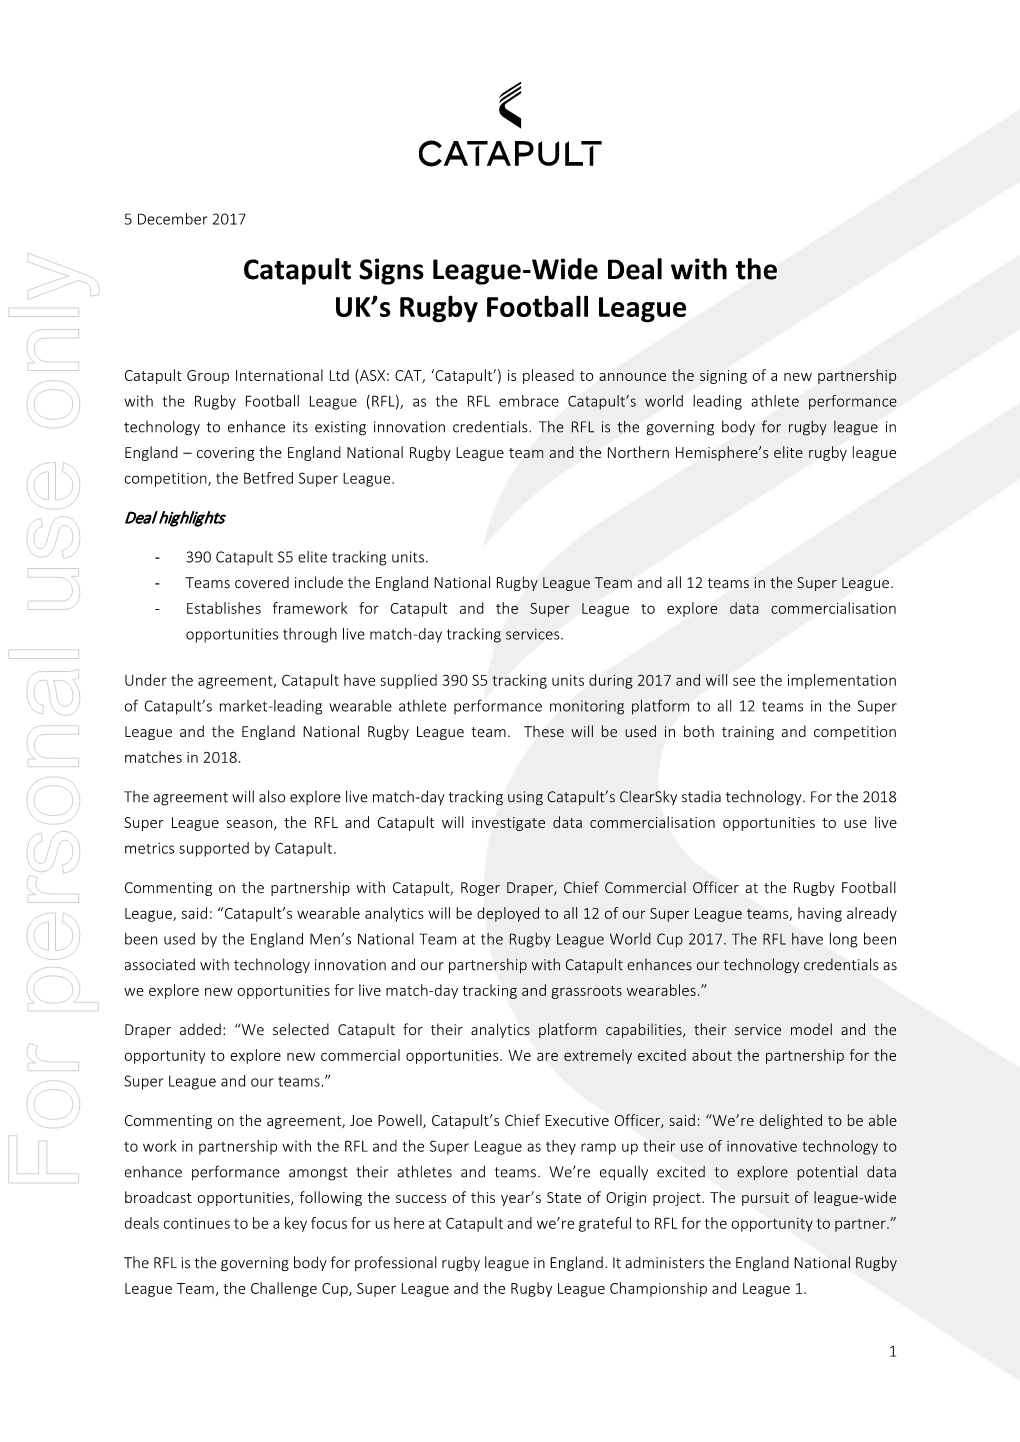 Catapult Signs League-Wide Deal with the UK's Rugby Football League